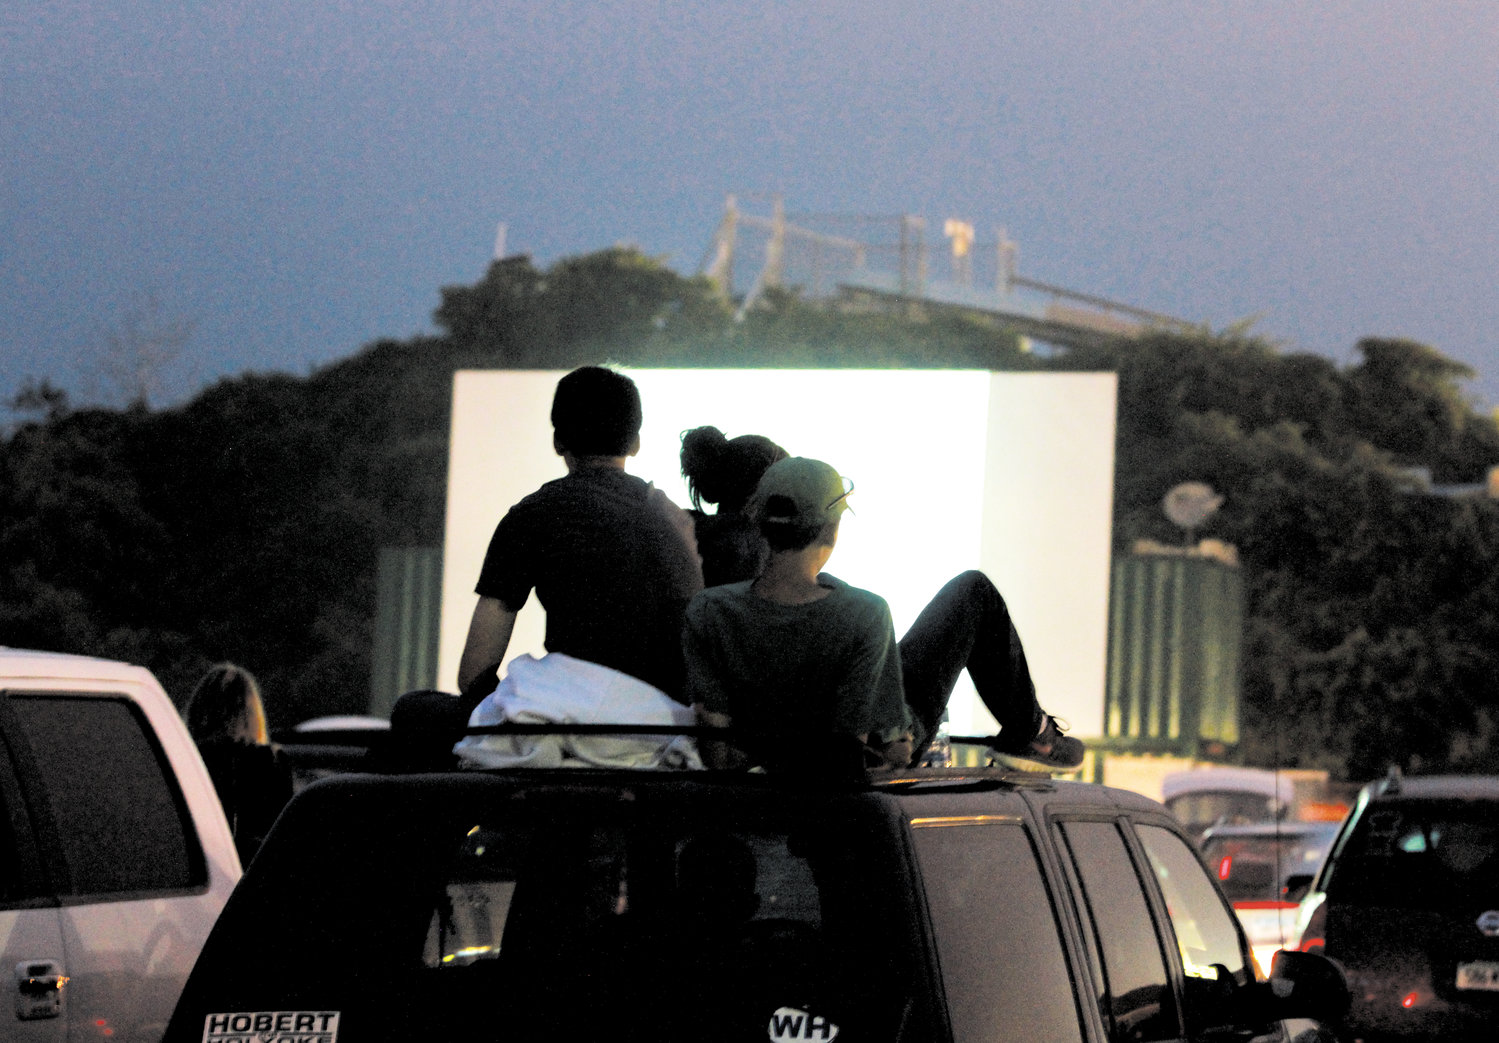 July 26-27: Catch a movie at Misquamicut Drive-In. This weekend's? Ghostbusters!